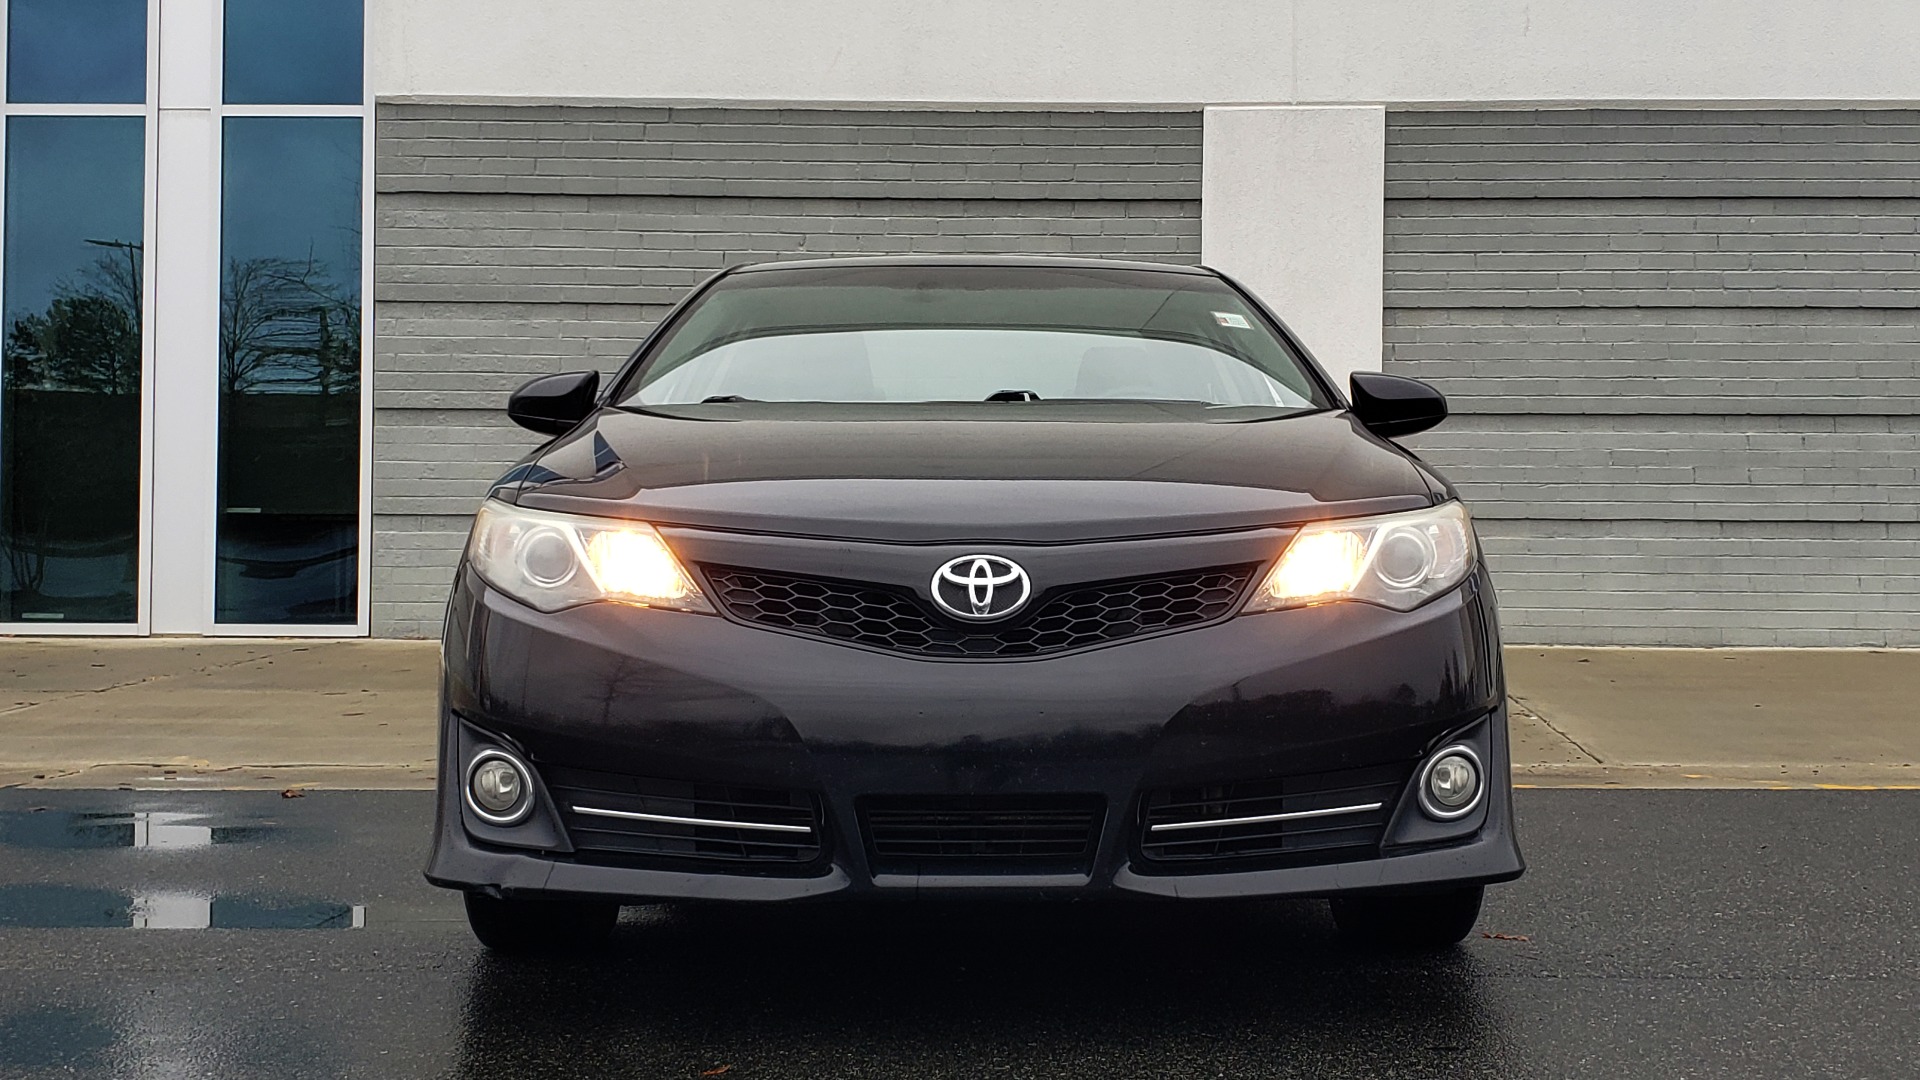 Used 2014 Toyota CAMRY SE SEDAN / 2.5L 4-CYL / 6-SPD AUTO / 17IN ALLOY WHEELS for sale Sold at Formula Imports in Charlotte NC 28227 19